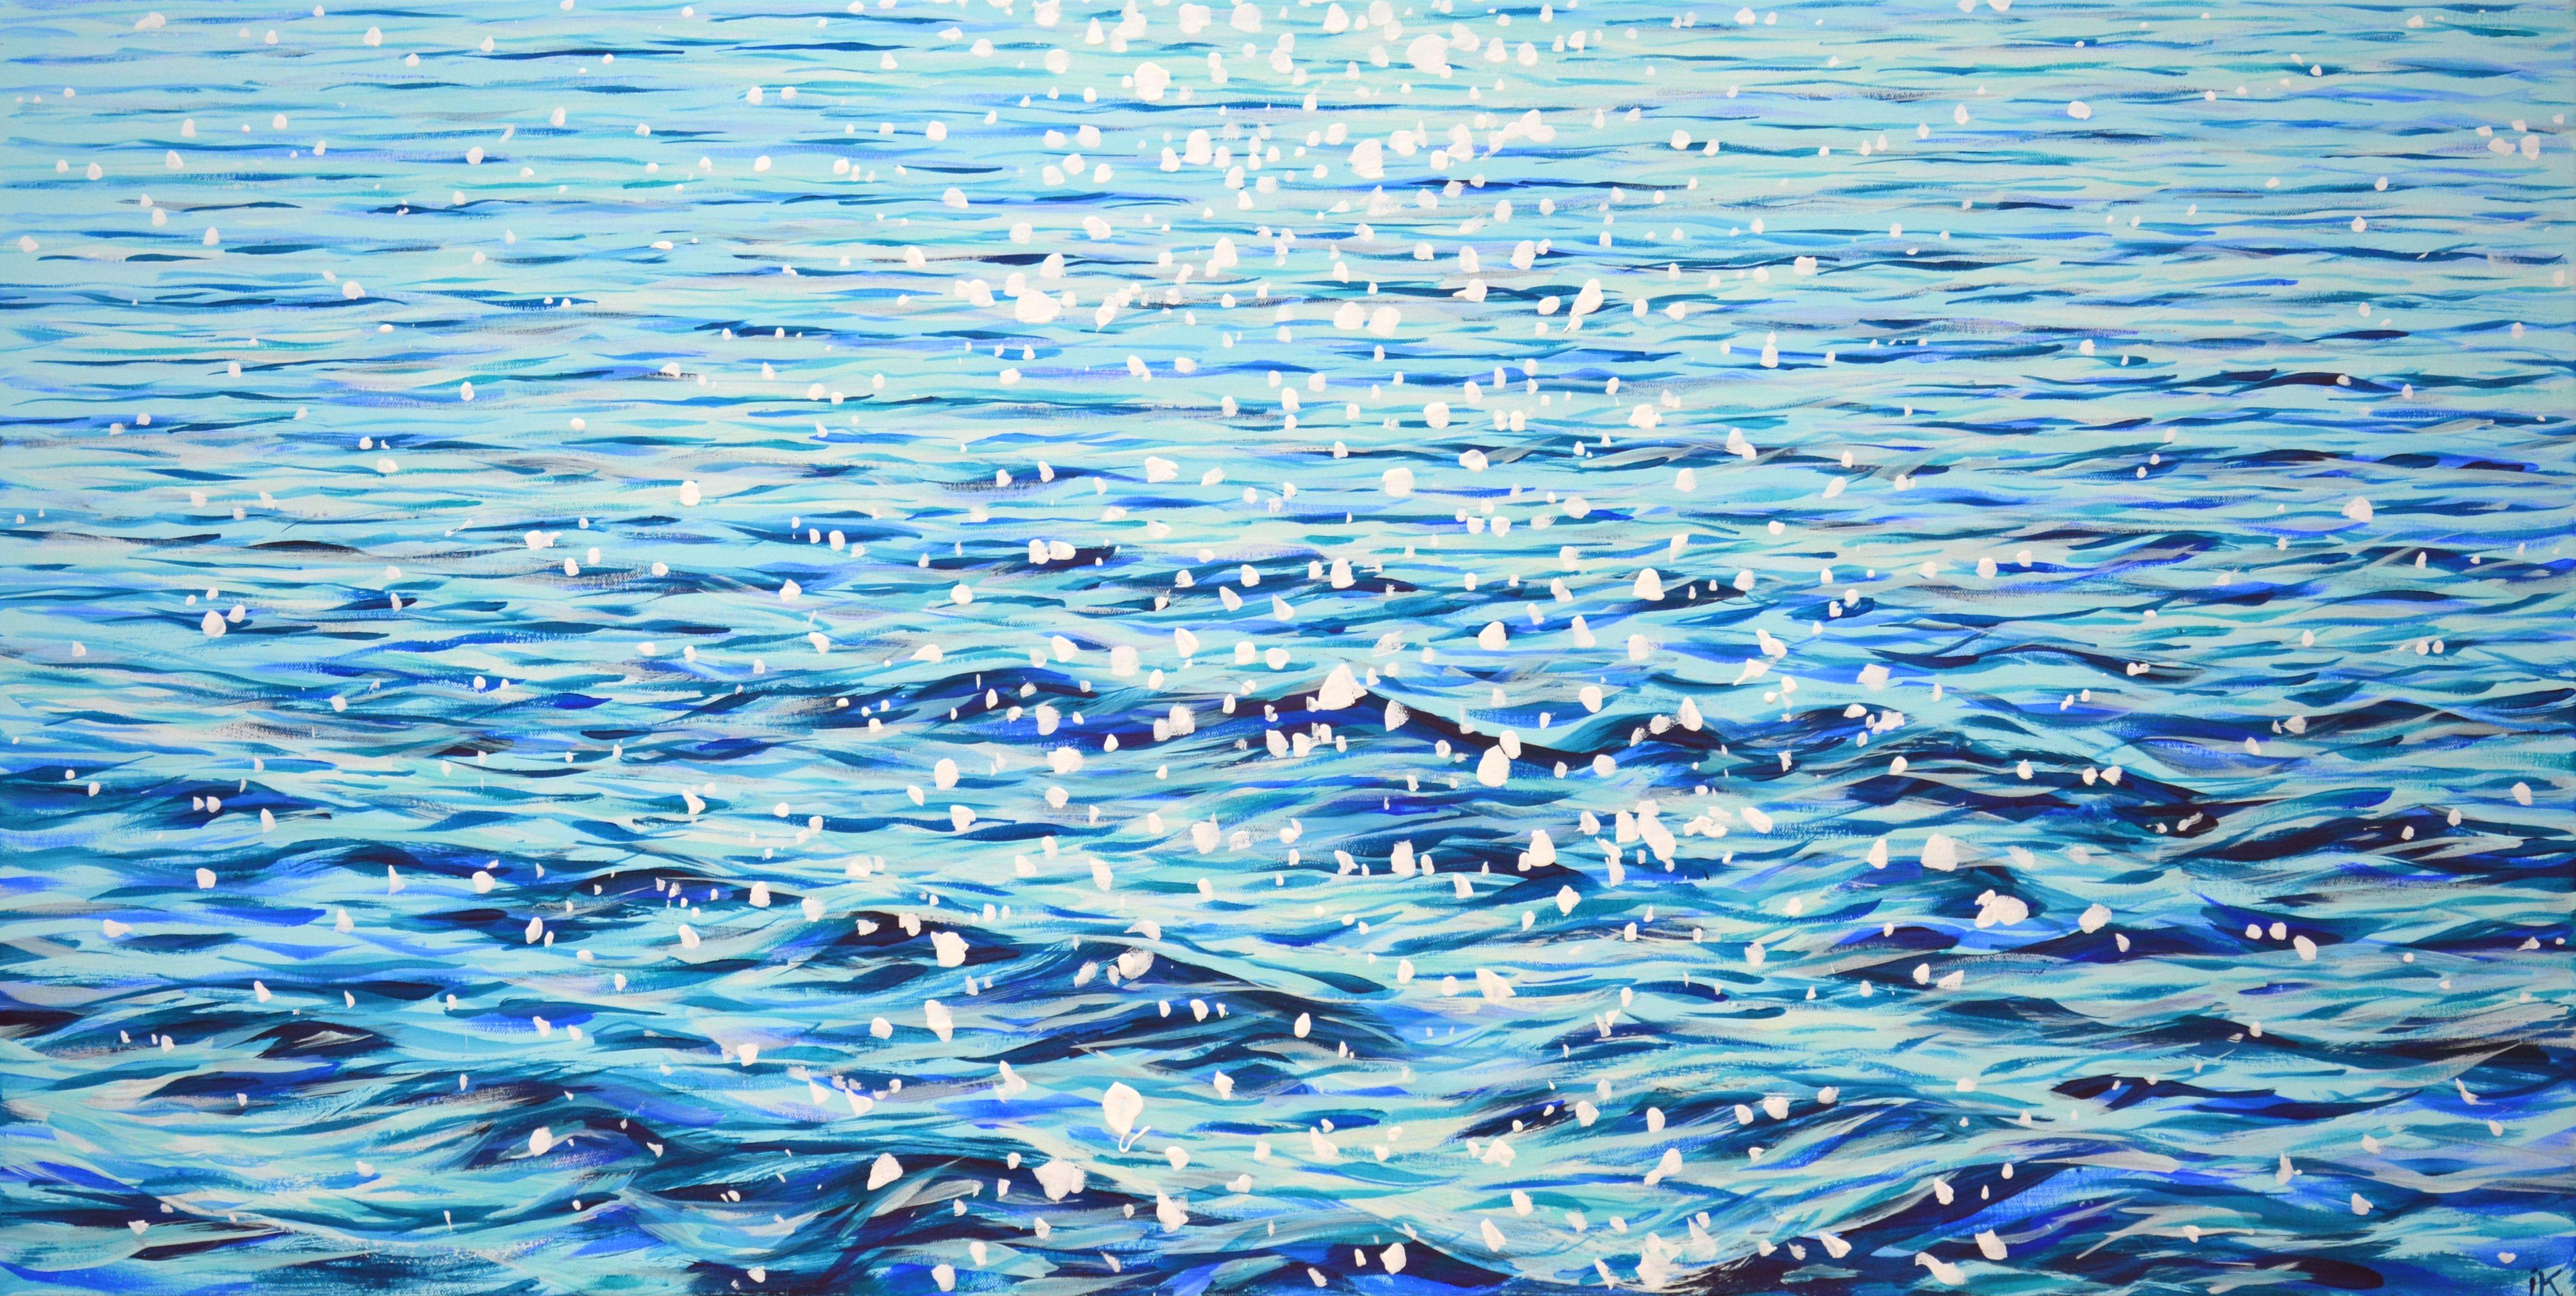 Light on the water 2. The shining of the ocean, small waves, the glare of the sun on the water create an atmosphere of relaxation, romance. Made in the style of realism. Part of a permanent series of seascapes. The picture is of high quality, the